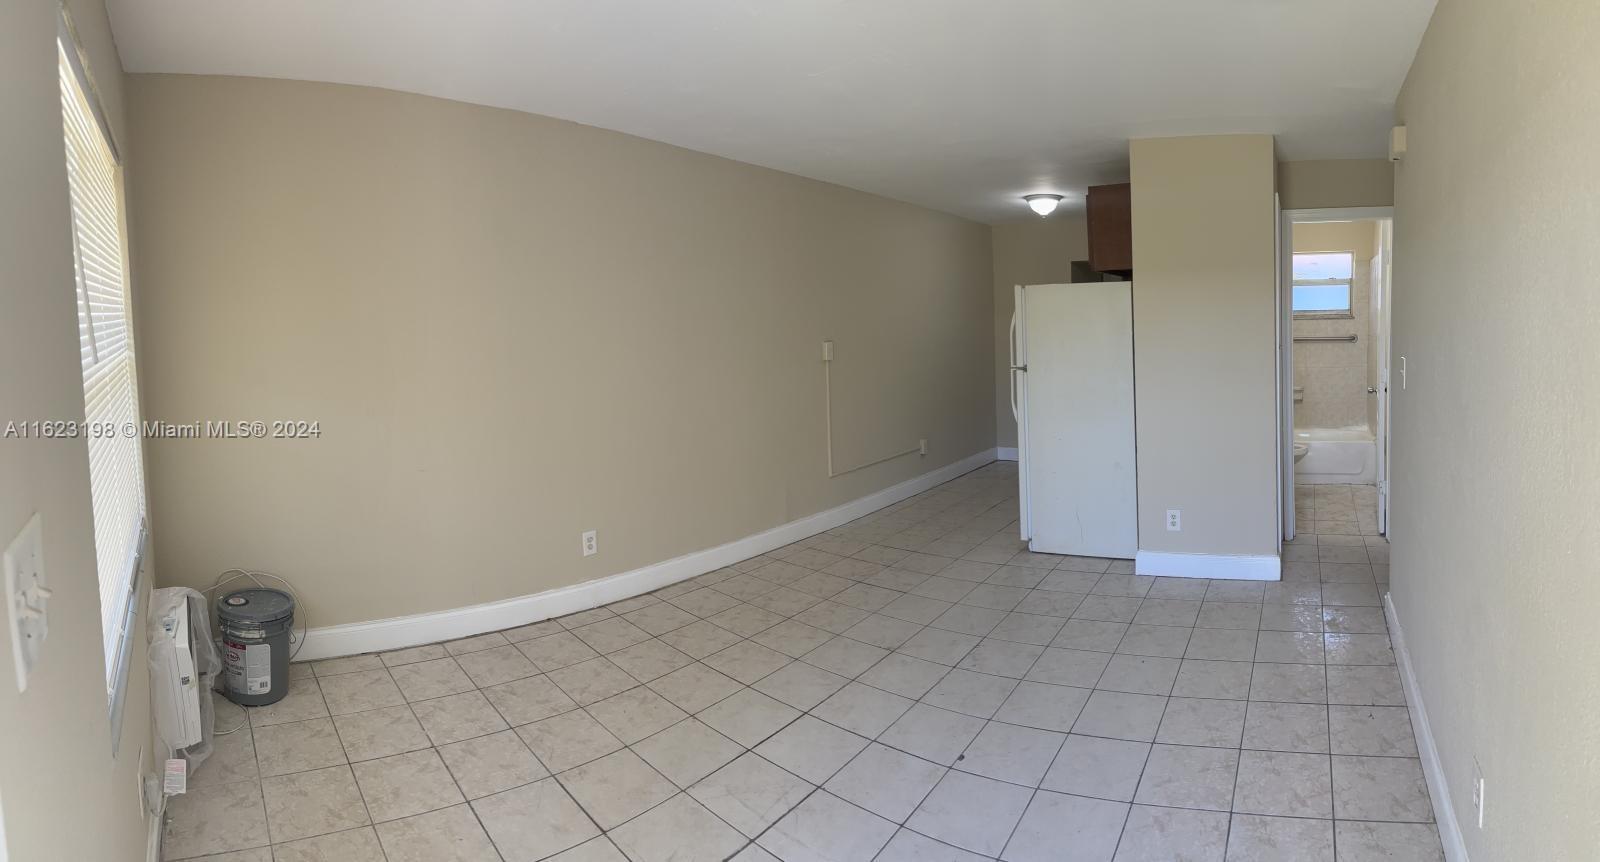 Rental Property at 721 Nw 4th Ave 3, Fort Lauderdale, Broward County, Florida - Bedrooms: 2 
Bathrooms: 1  - $1,600 MO.